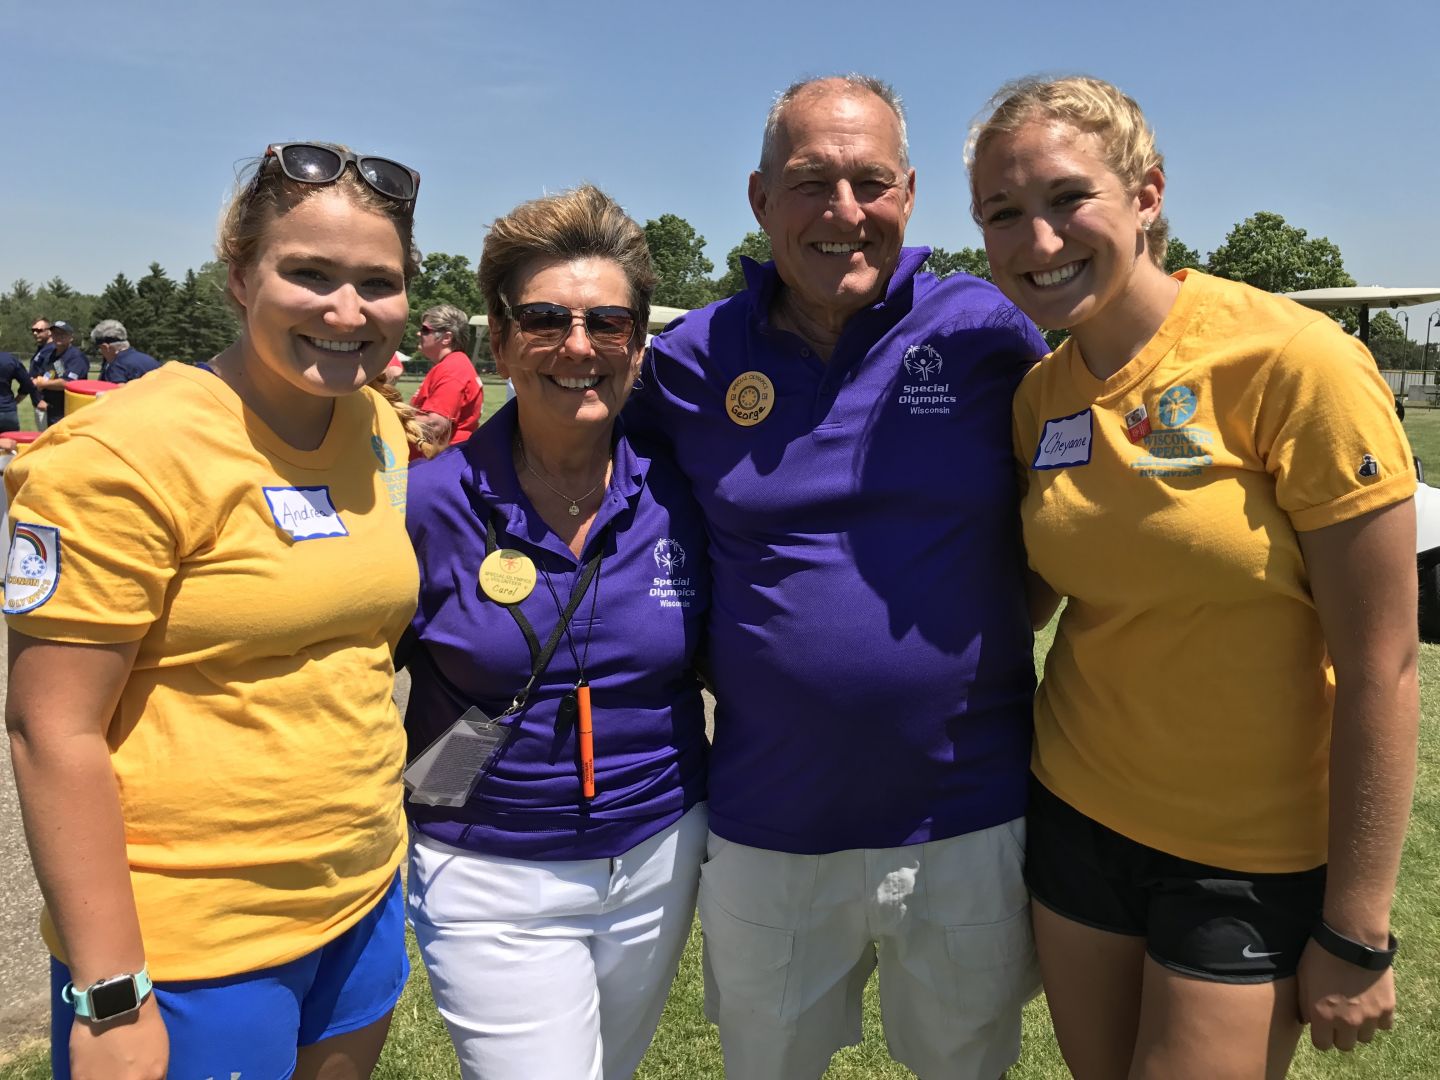 The Strassers with their granddaughters at the 2017 Summer Games (L to R: Andrea Davis, Carol Strasser, George Strasser, Cheyanne Davis)